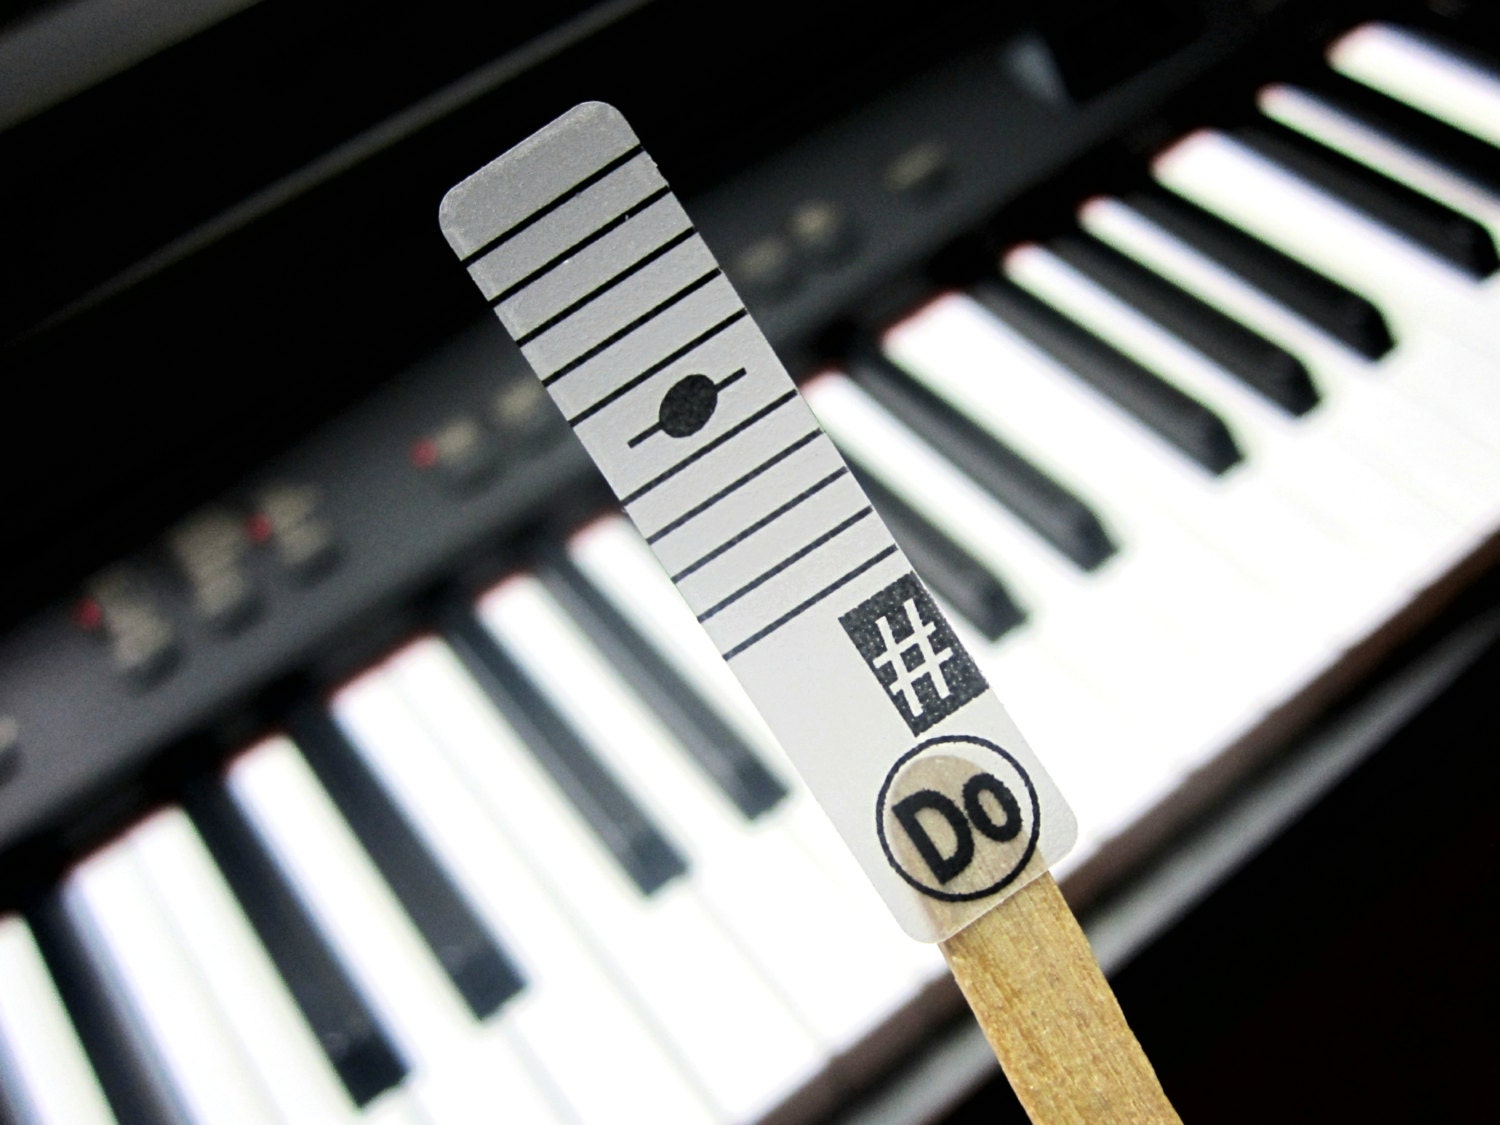 Piano Stickers Do-re-mi Music Keyboard Key Note Labels With Online Learning  Aids KEYNOTES 